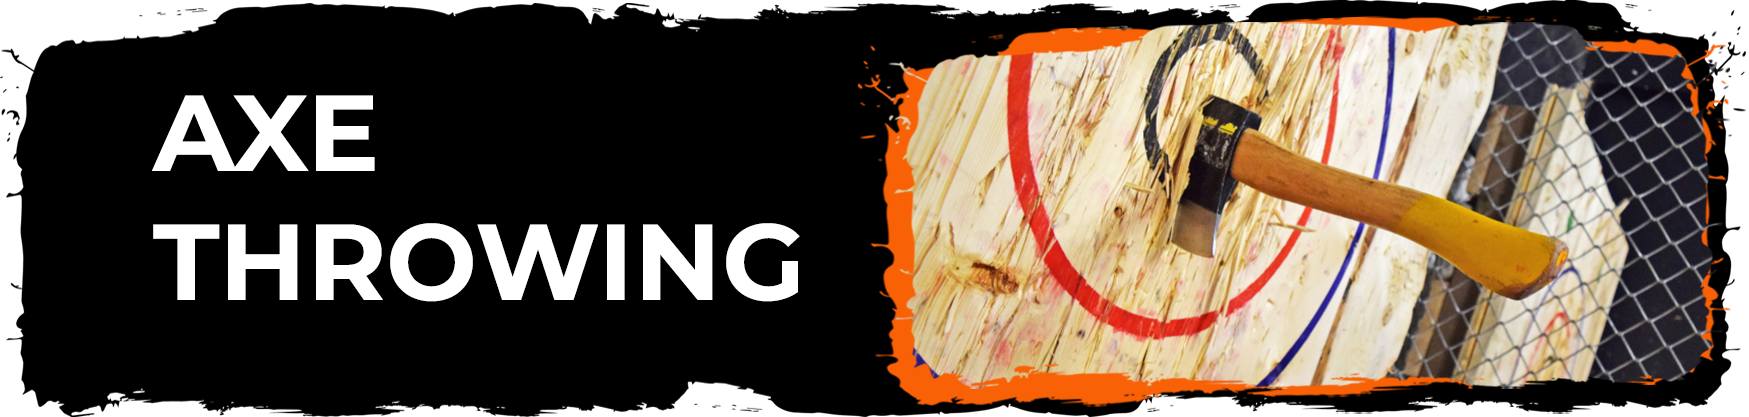 Axe Throwing Experience From Only £25 Per Person.